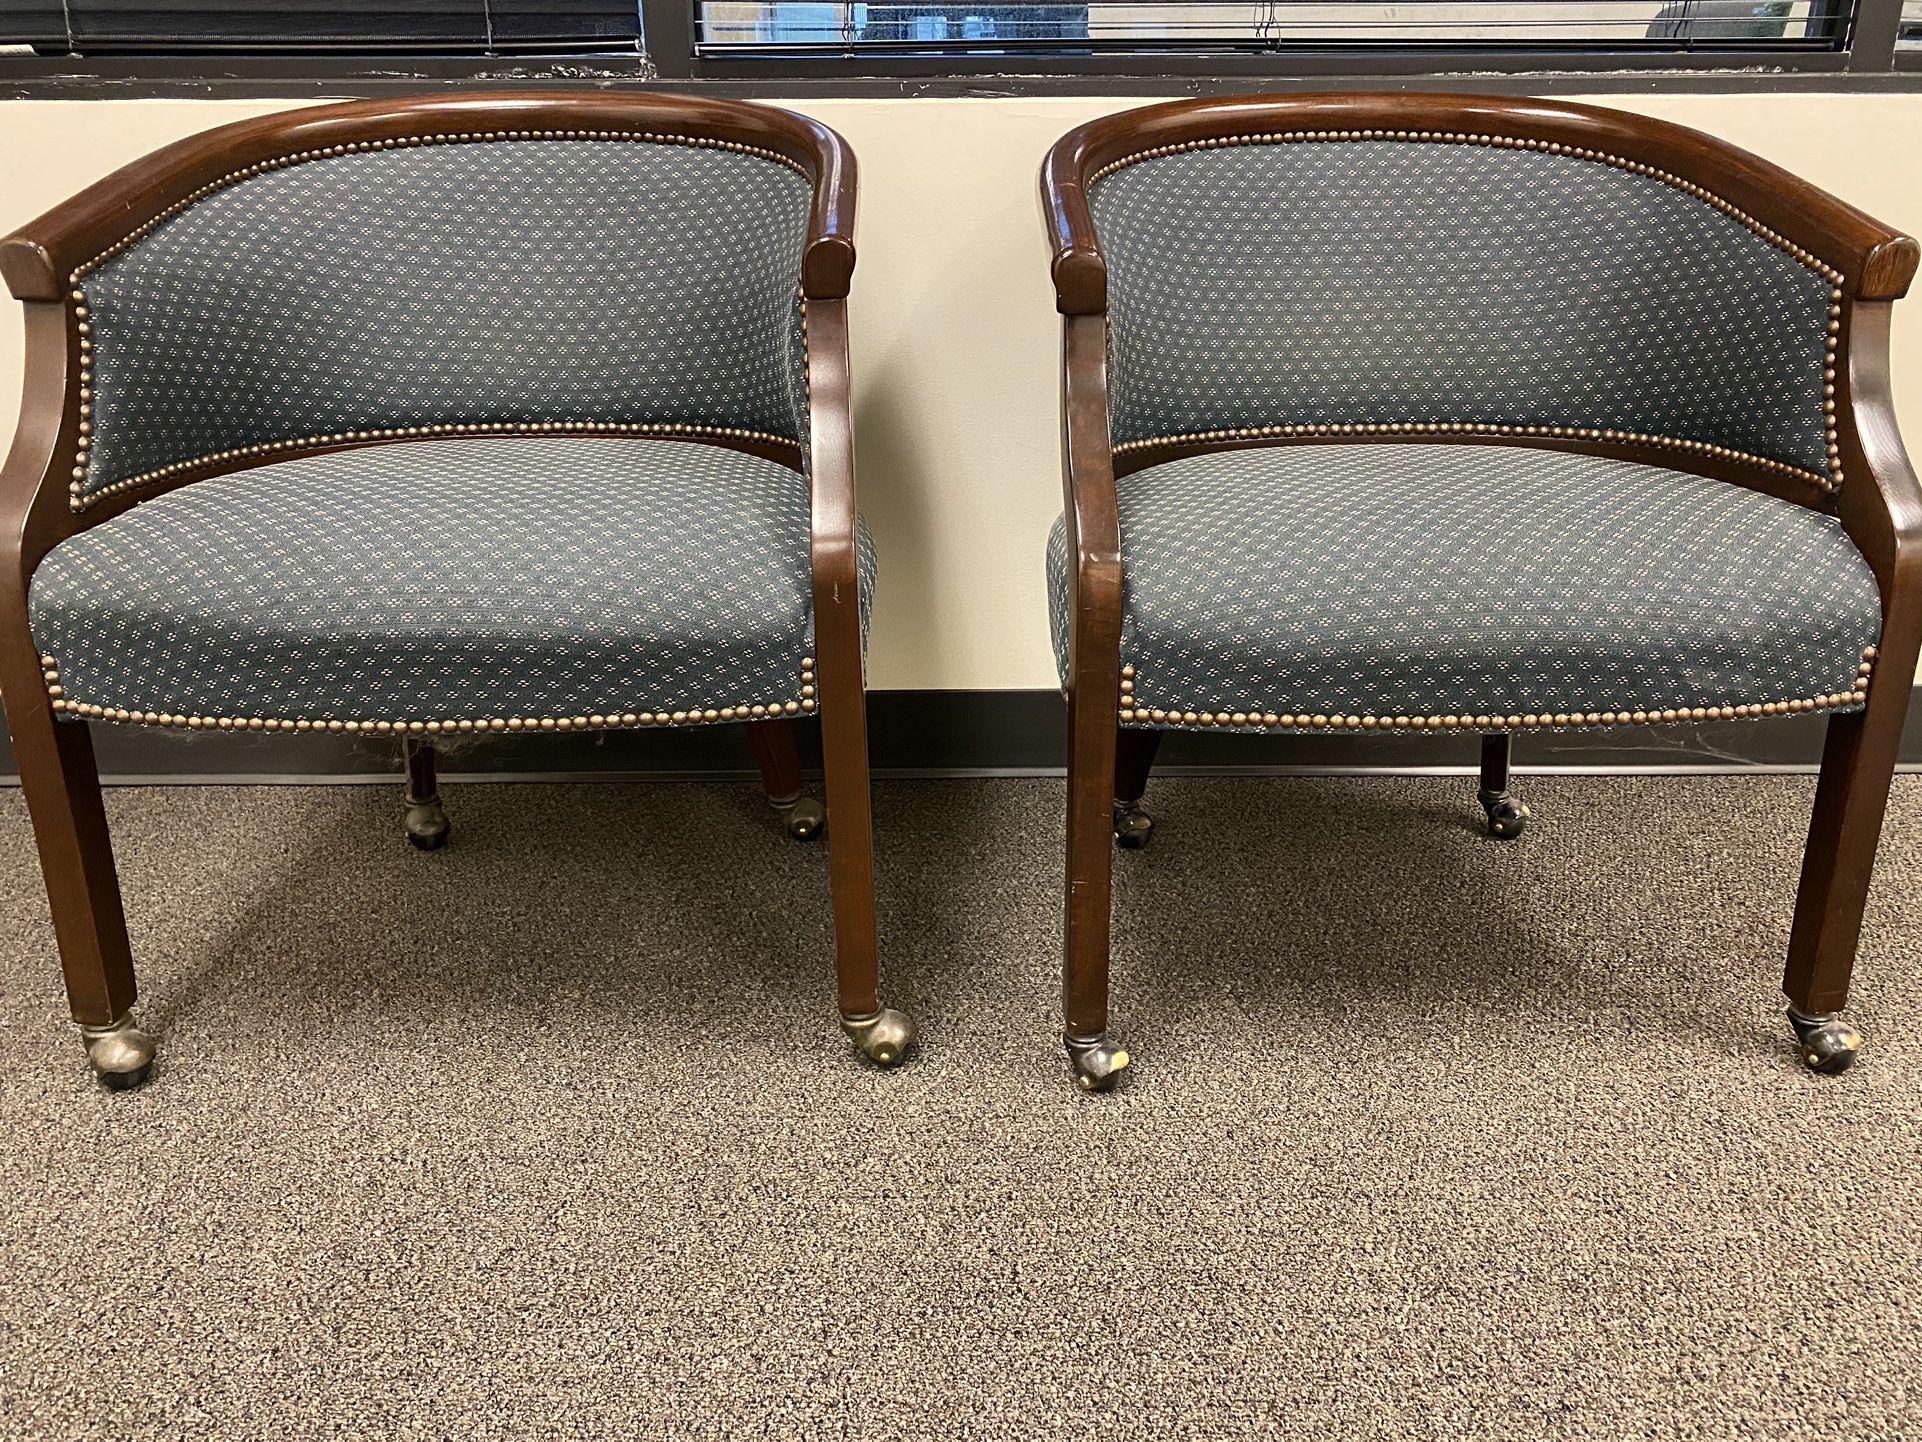 Matching chairs -  Classic design 